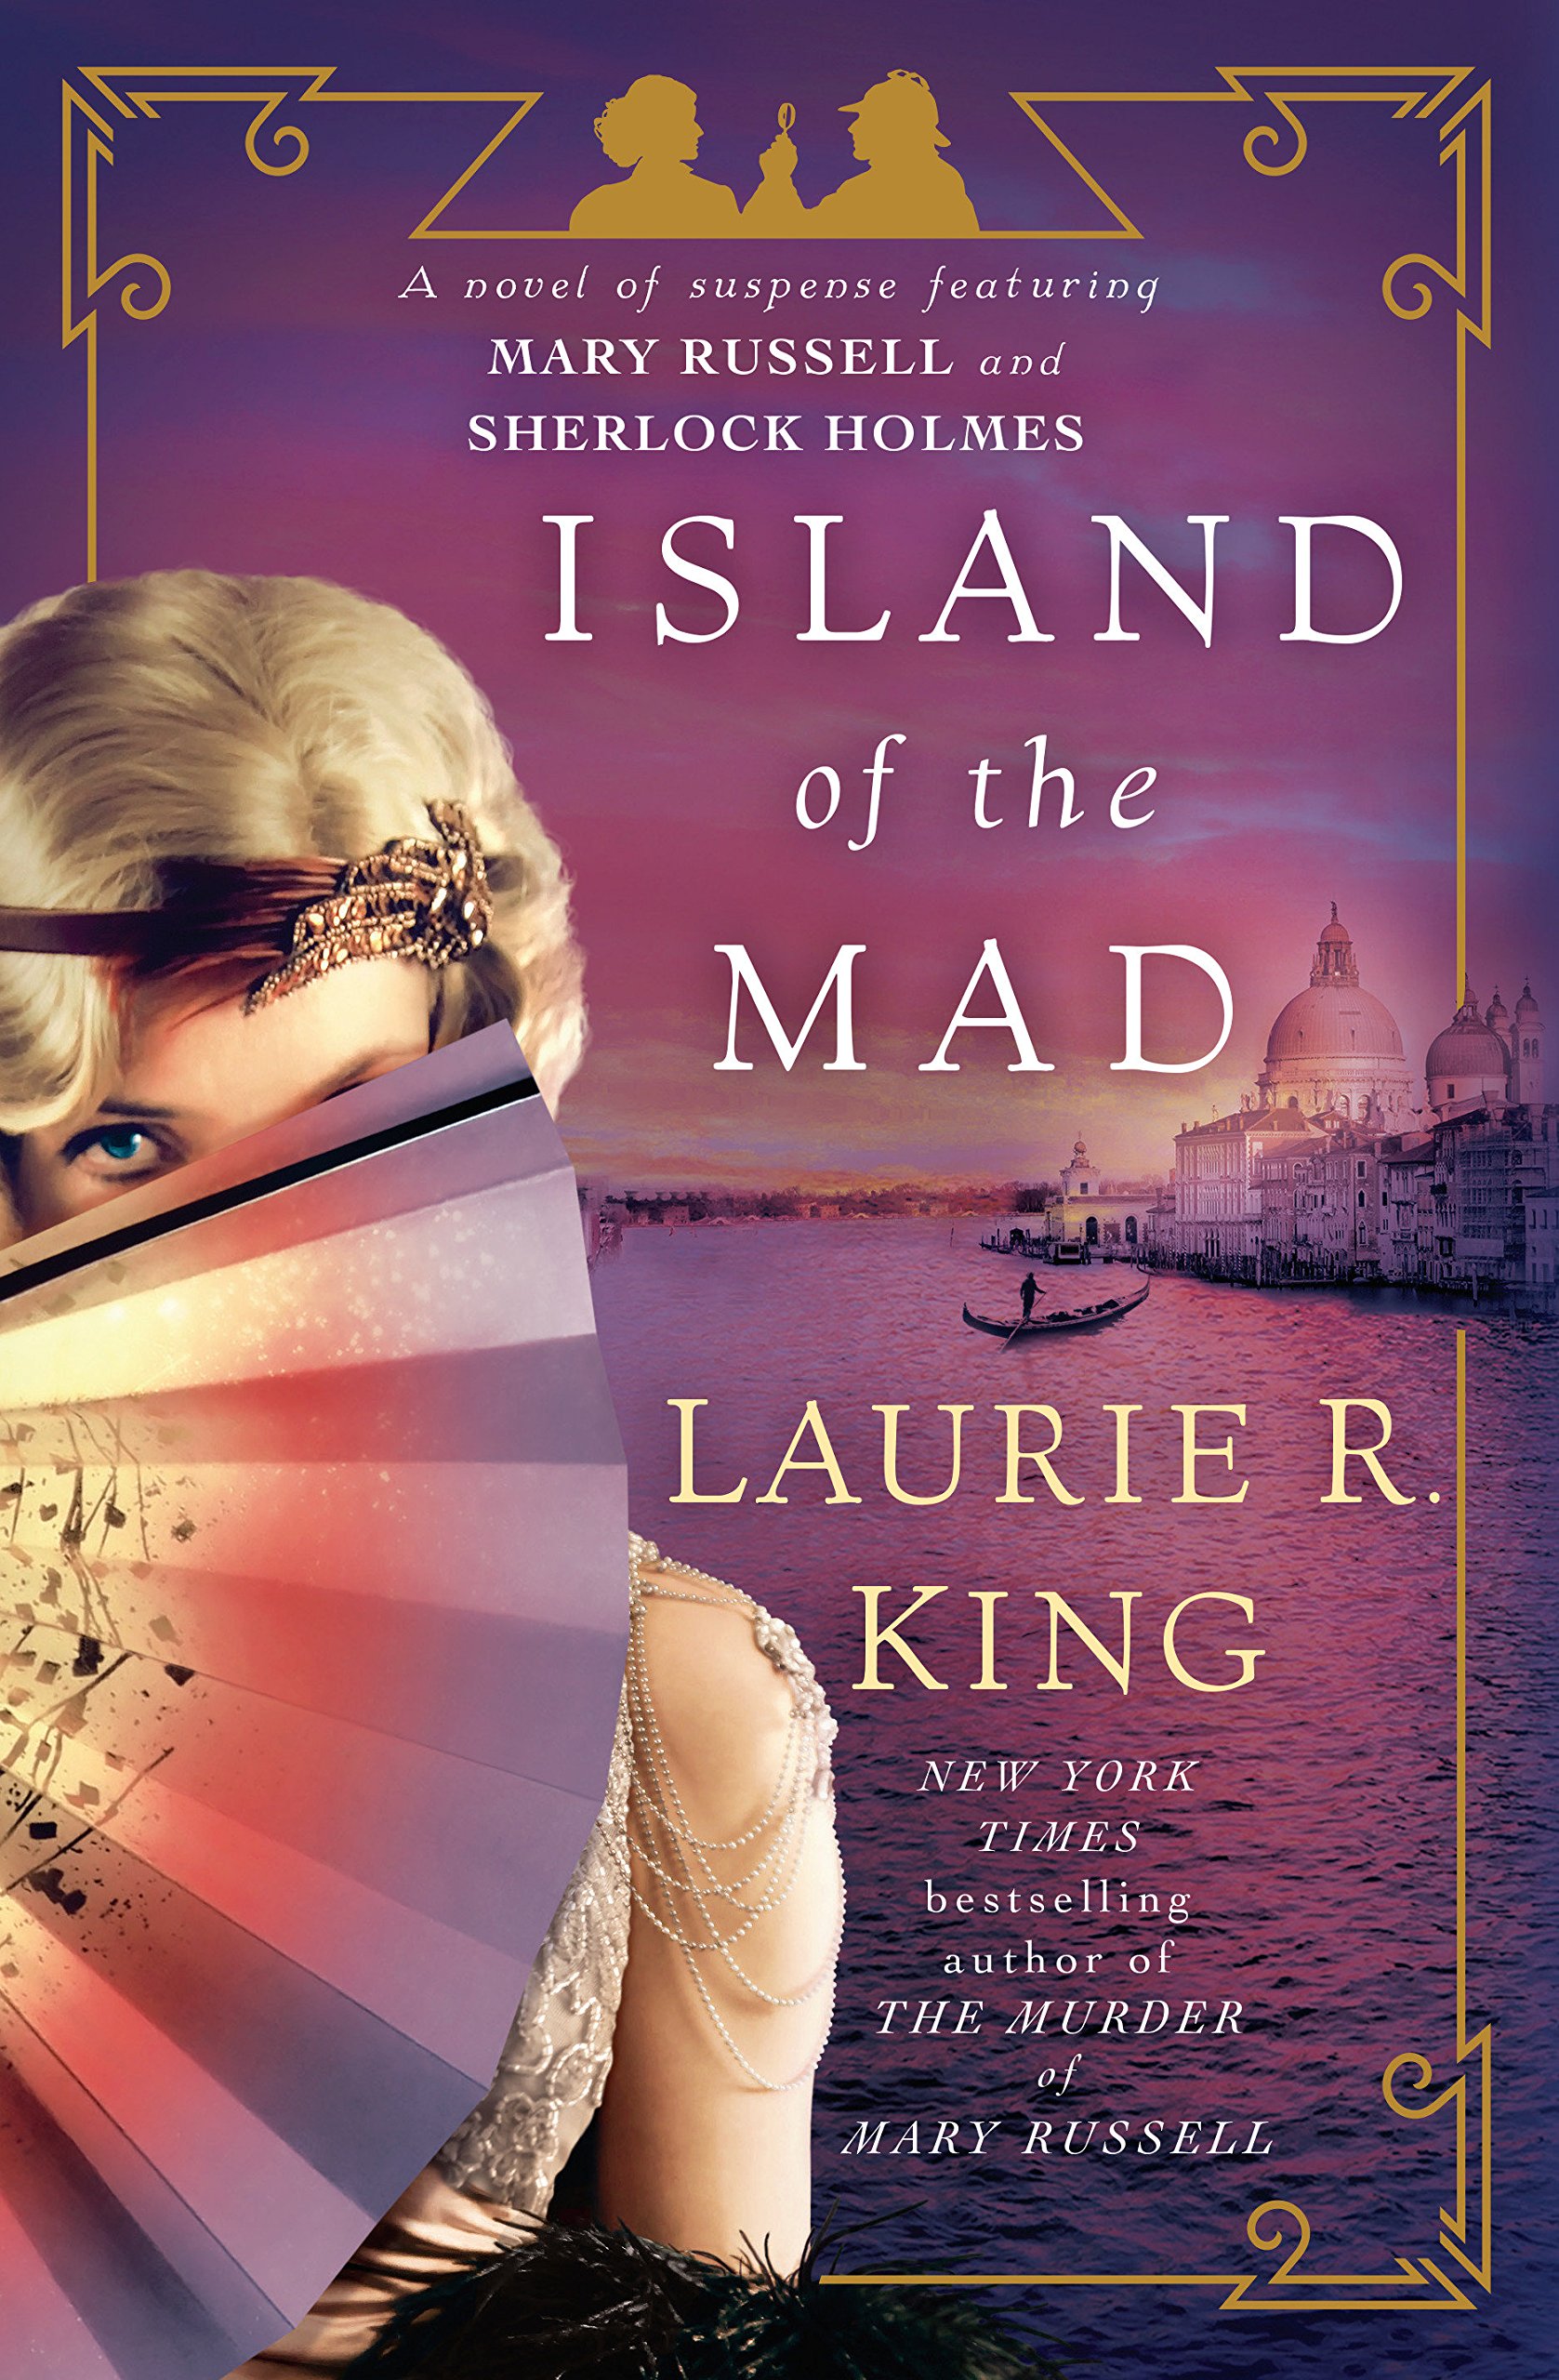 Island of the Mad: A novel of suspense featuring Mary Russell and Sherlock Holmes